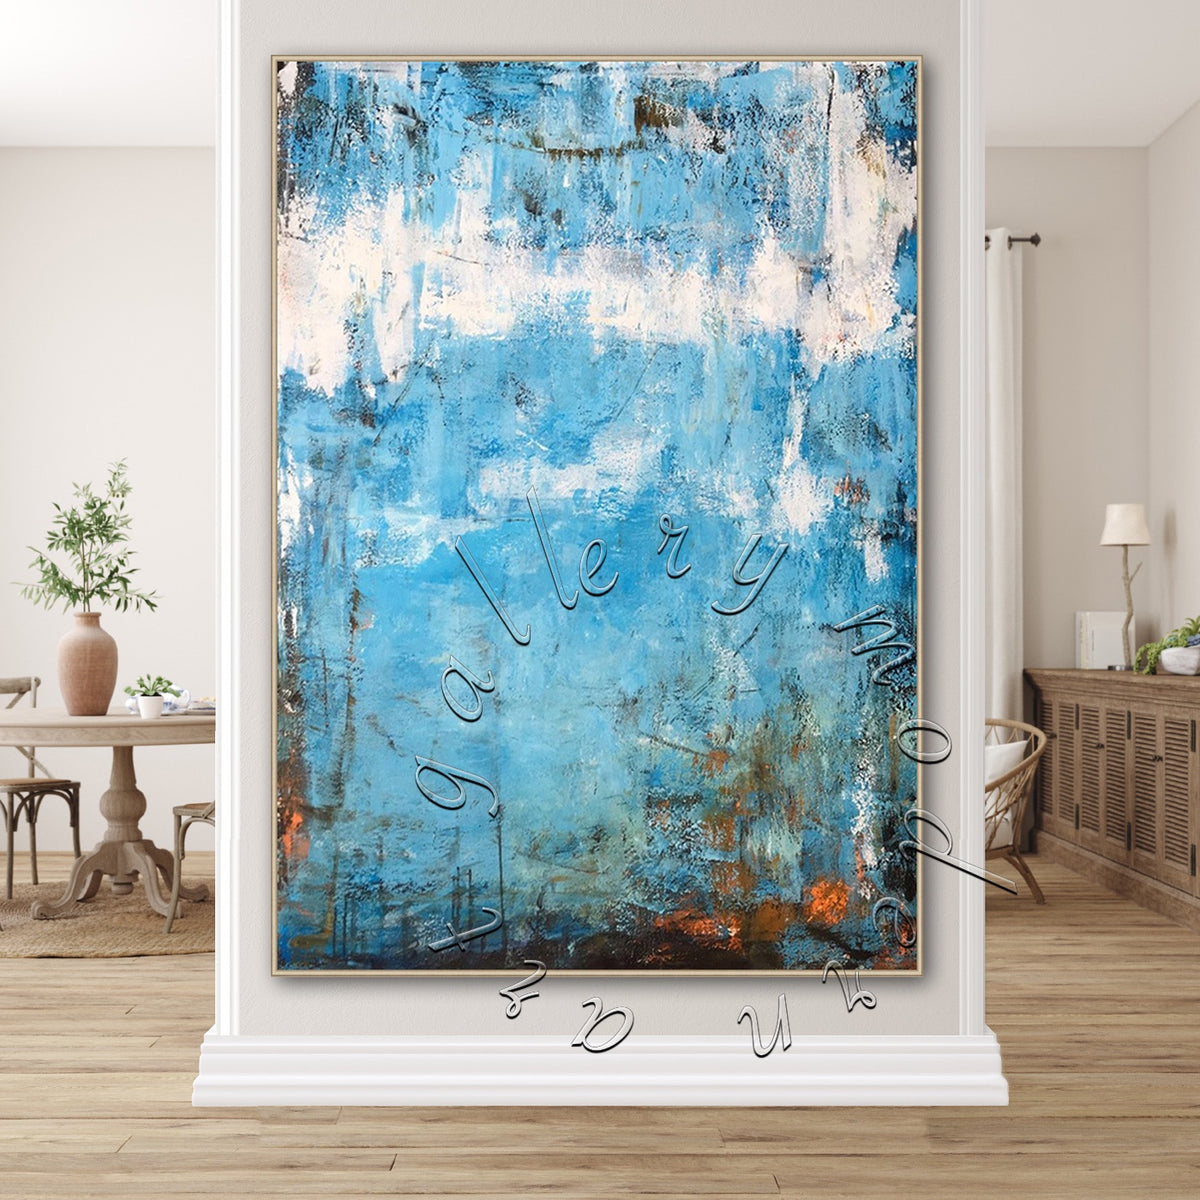 Blue Abstract Painting, Original Oil on Canvas Wall Art